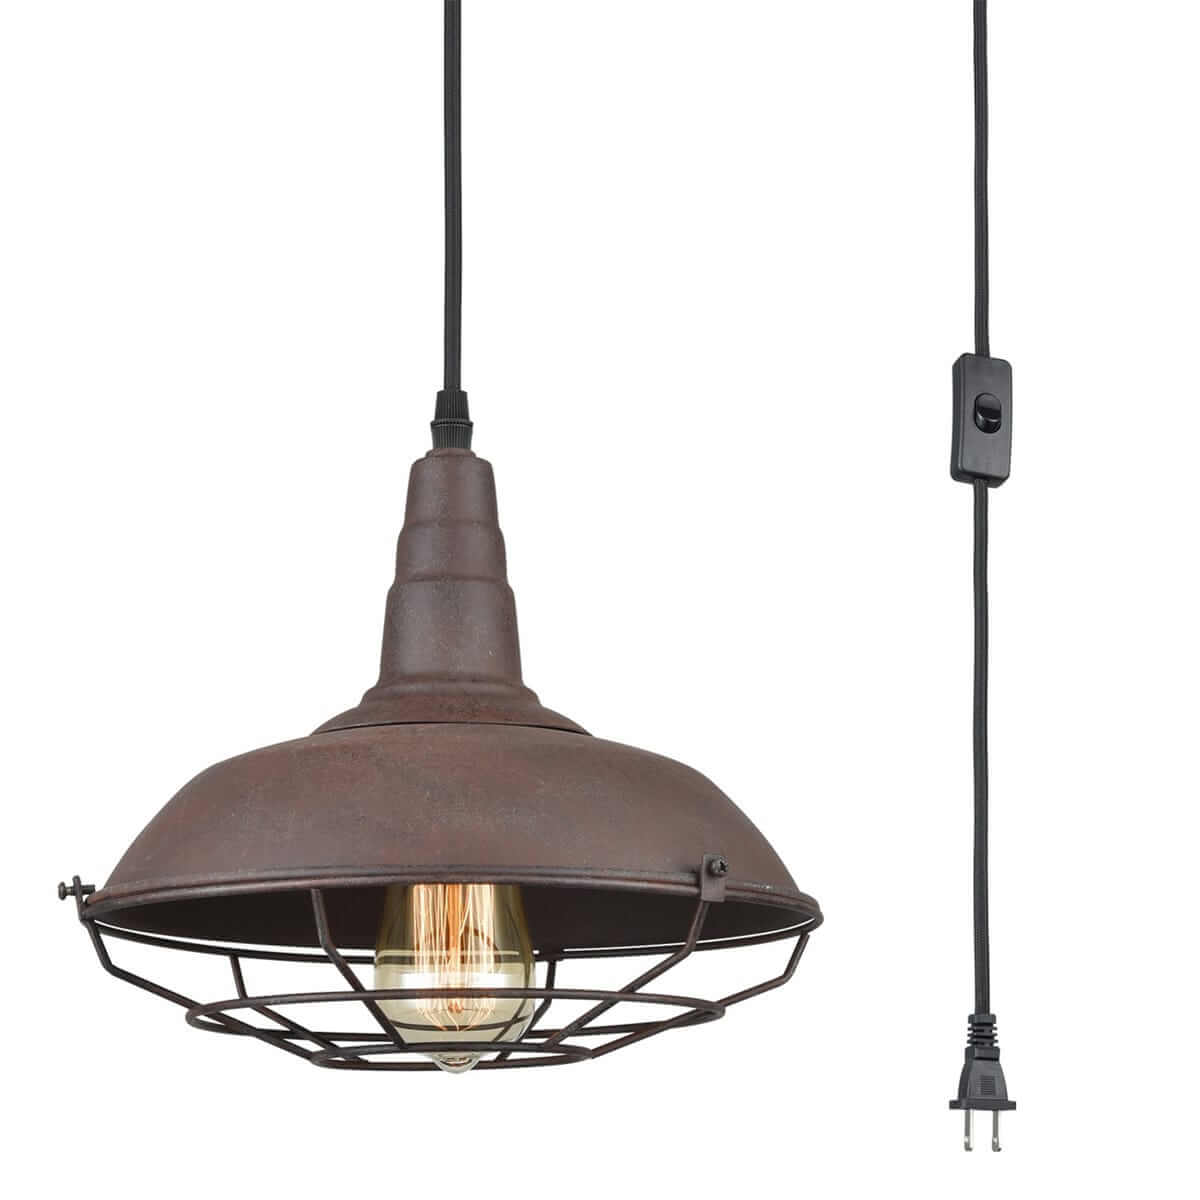 Farmhouse Plug-In Pendant Light with Rust Finish Metal Cage Shade